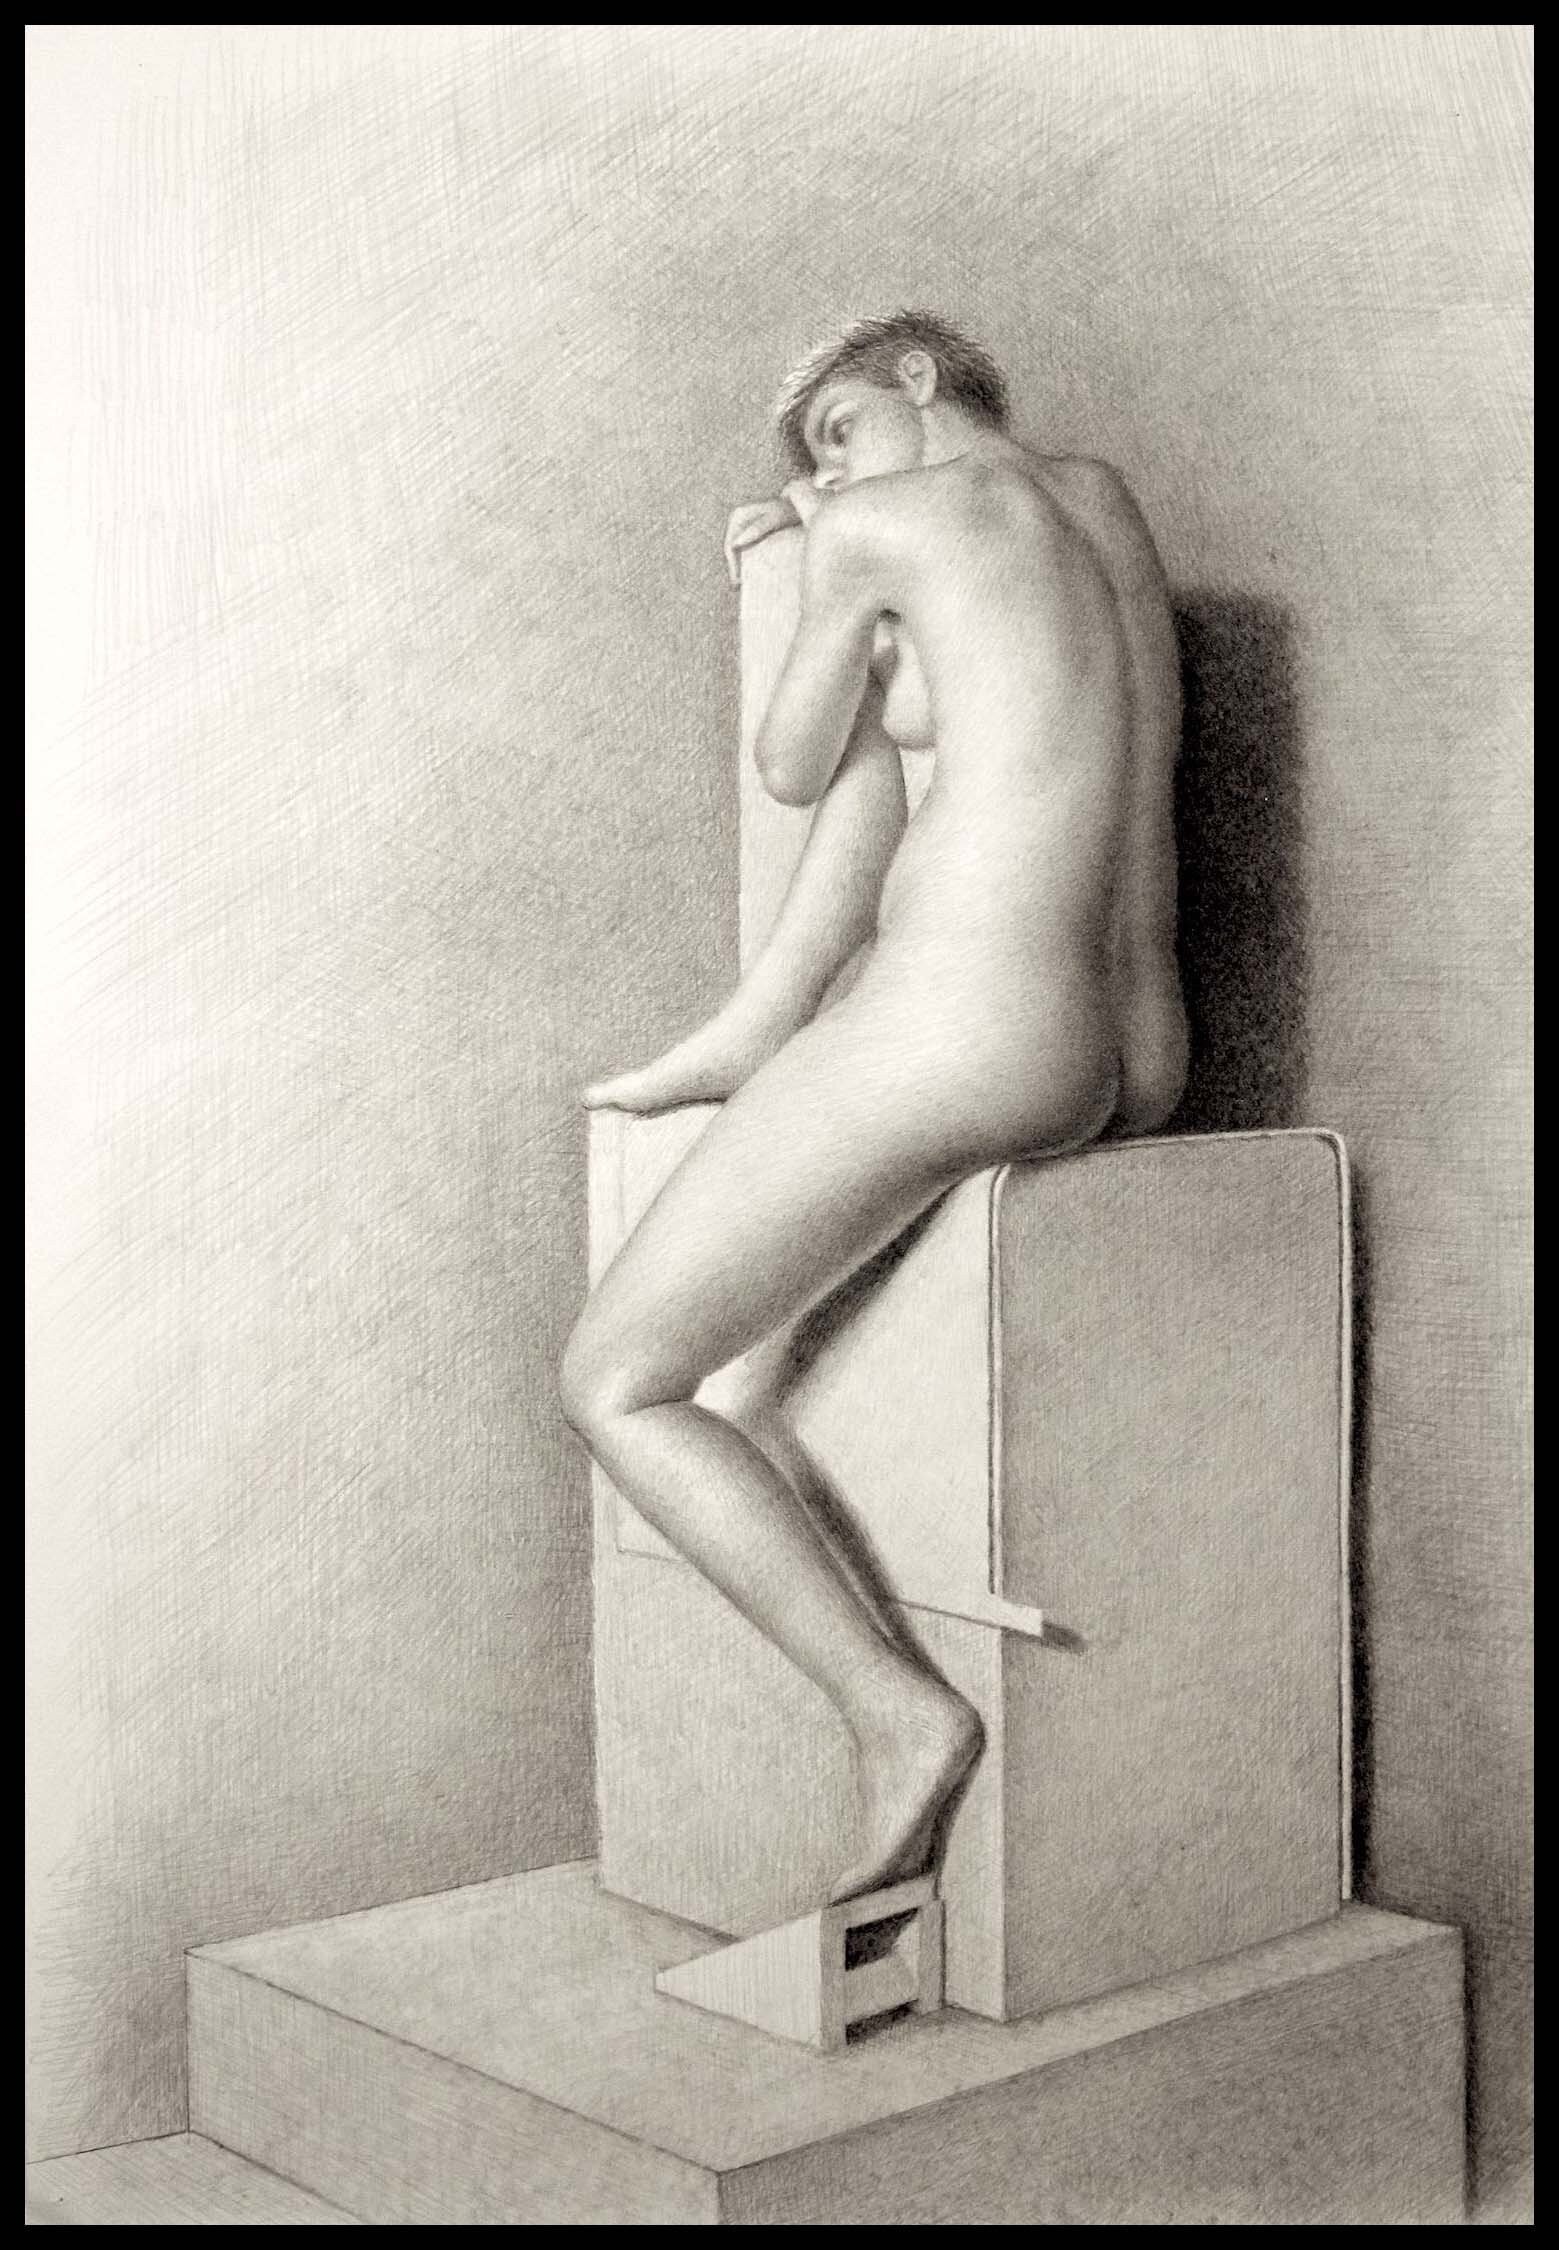  Nude Study (29”x21”) Graphite on Arches 